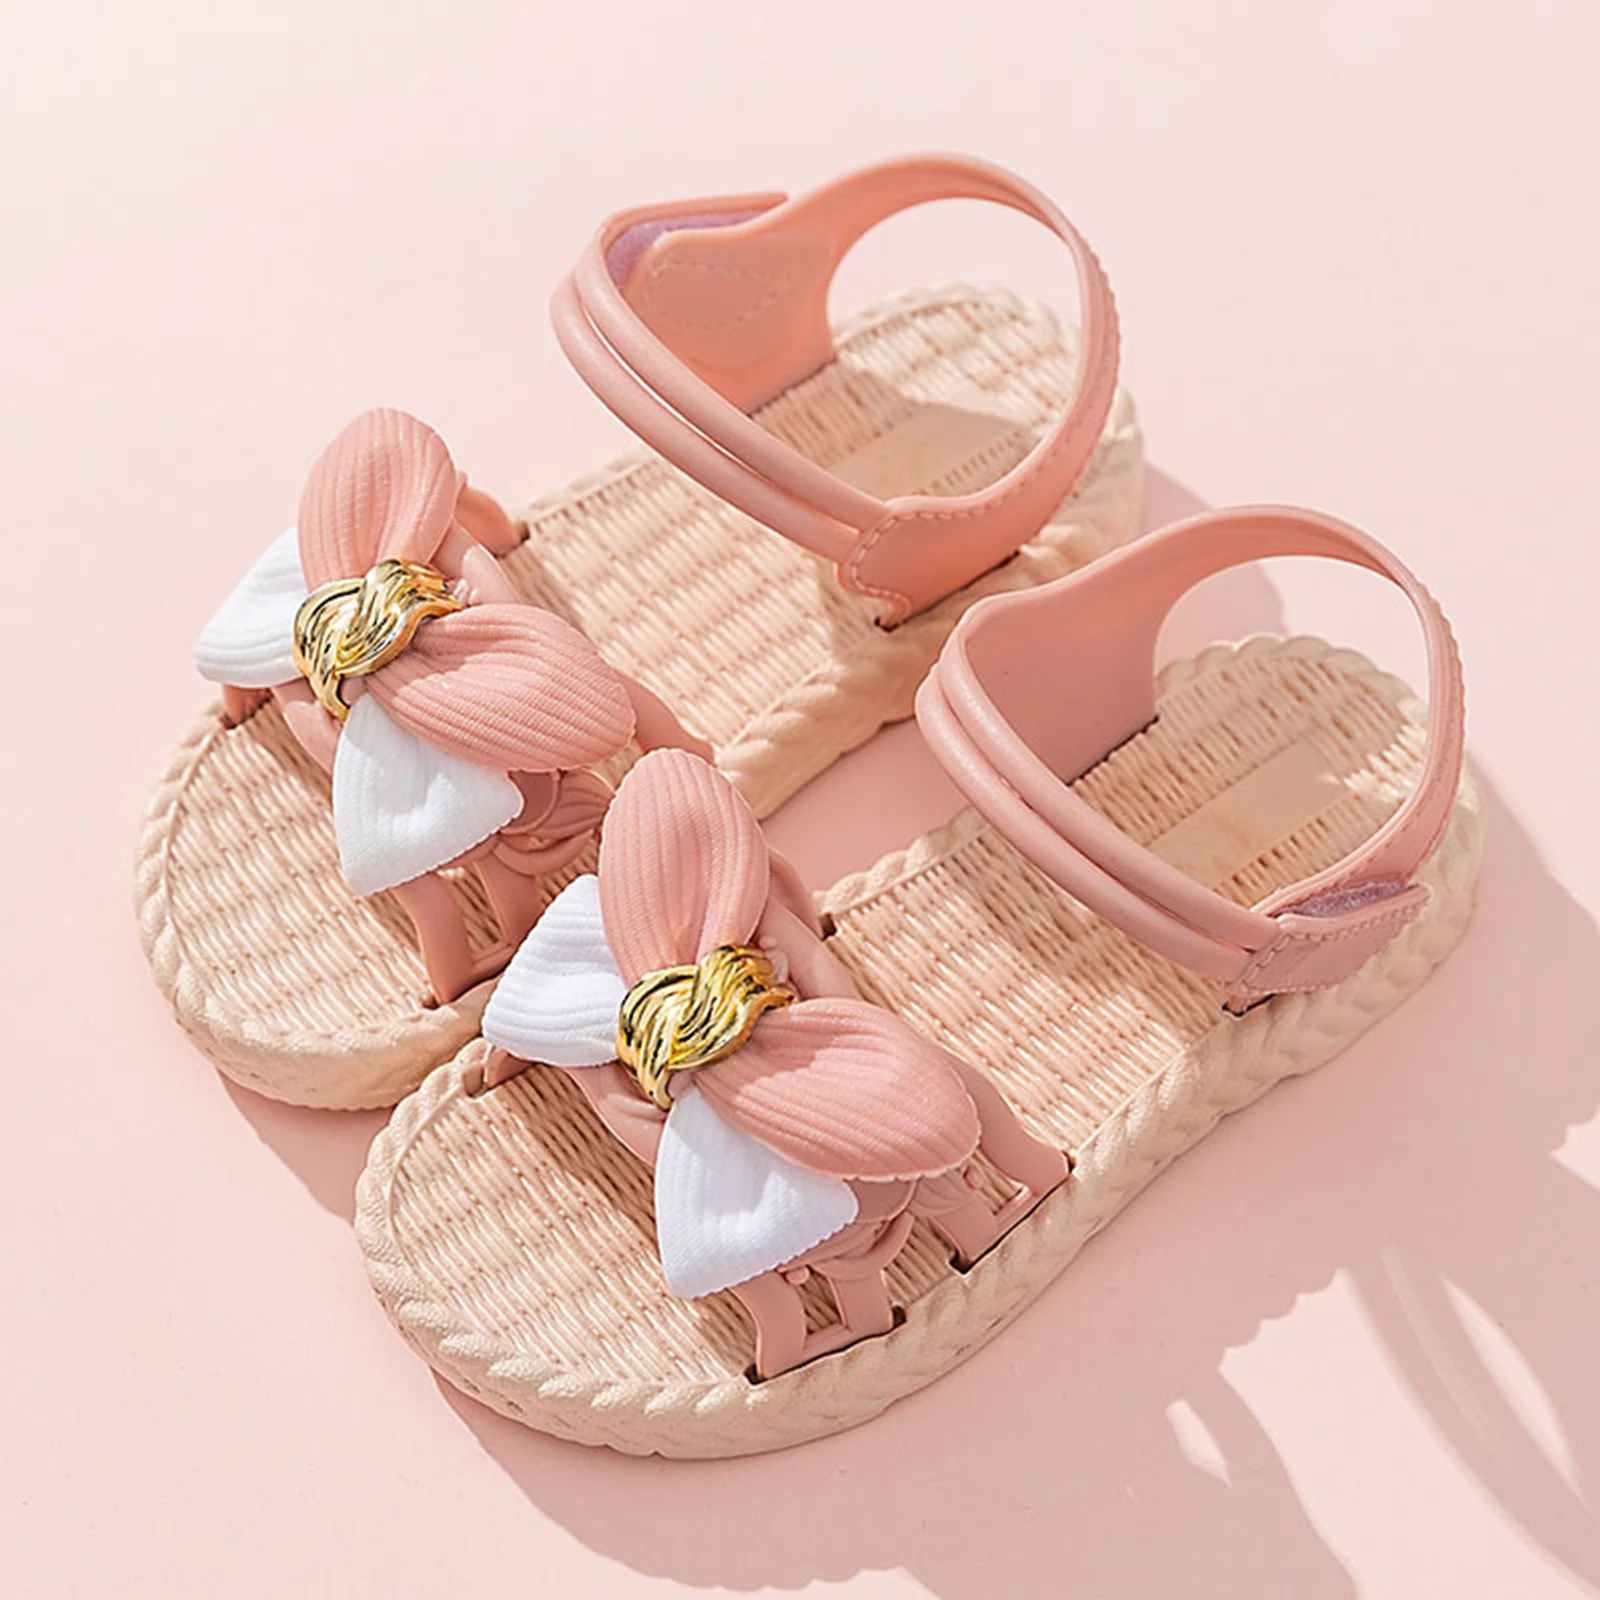 best leather shoes 2022 Girls Soft Sole Princess Sandals for Summer Bow Knot Decors Hollow Out Flat Shoes Pink/ Blue/ Brown extra wide fit children's shoes